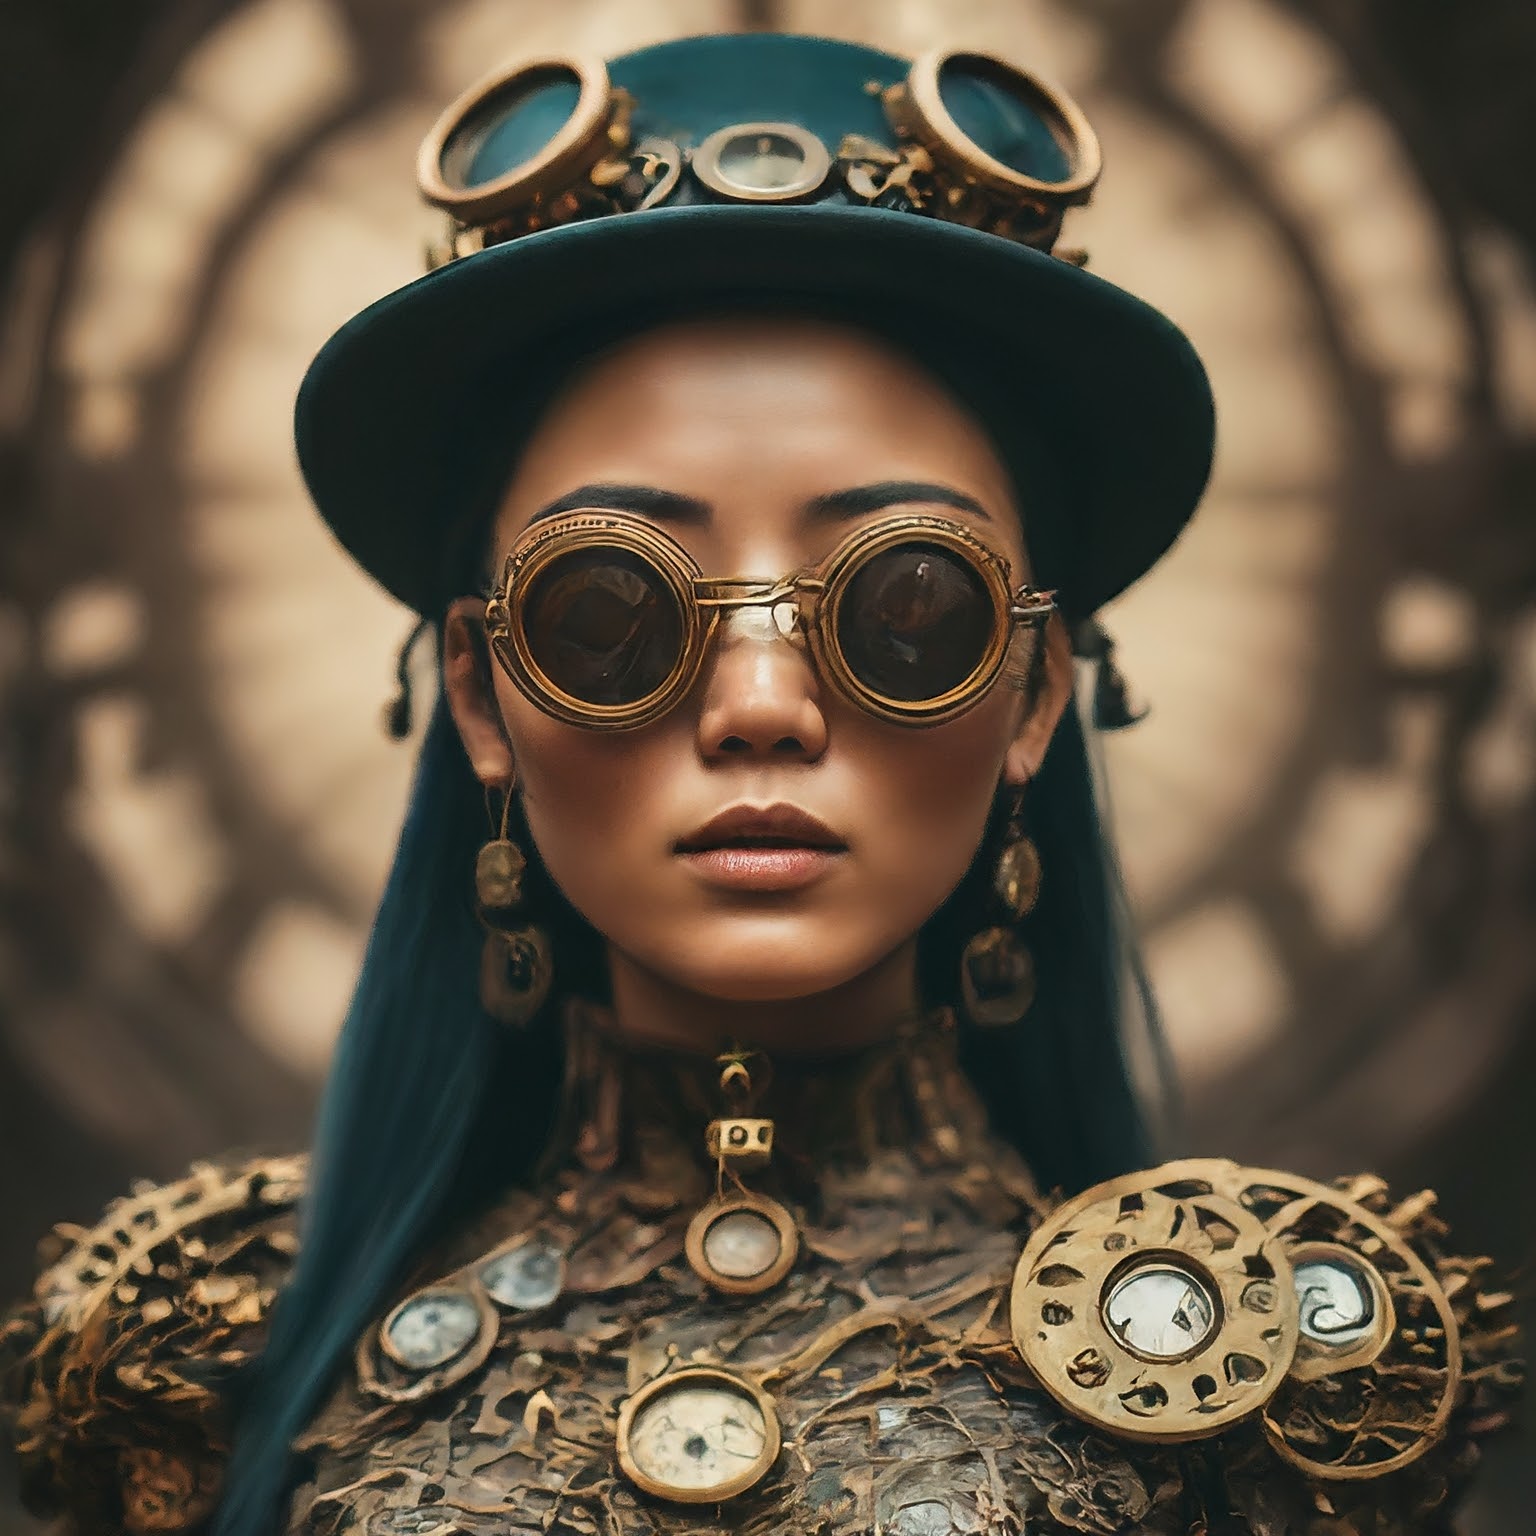 A close-up of a person wearing fantastical attire adorned with gears and clocks. 